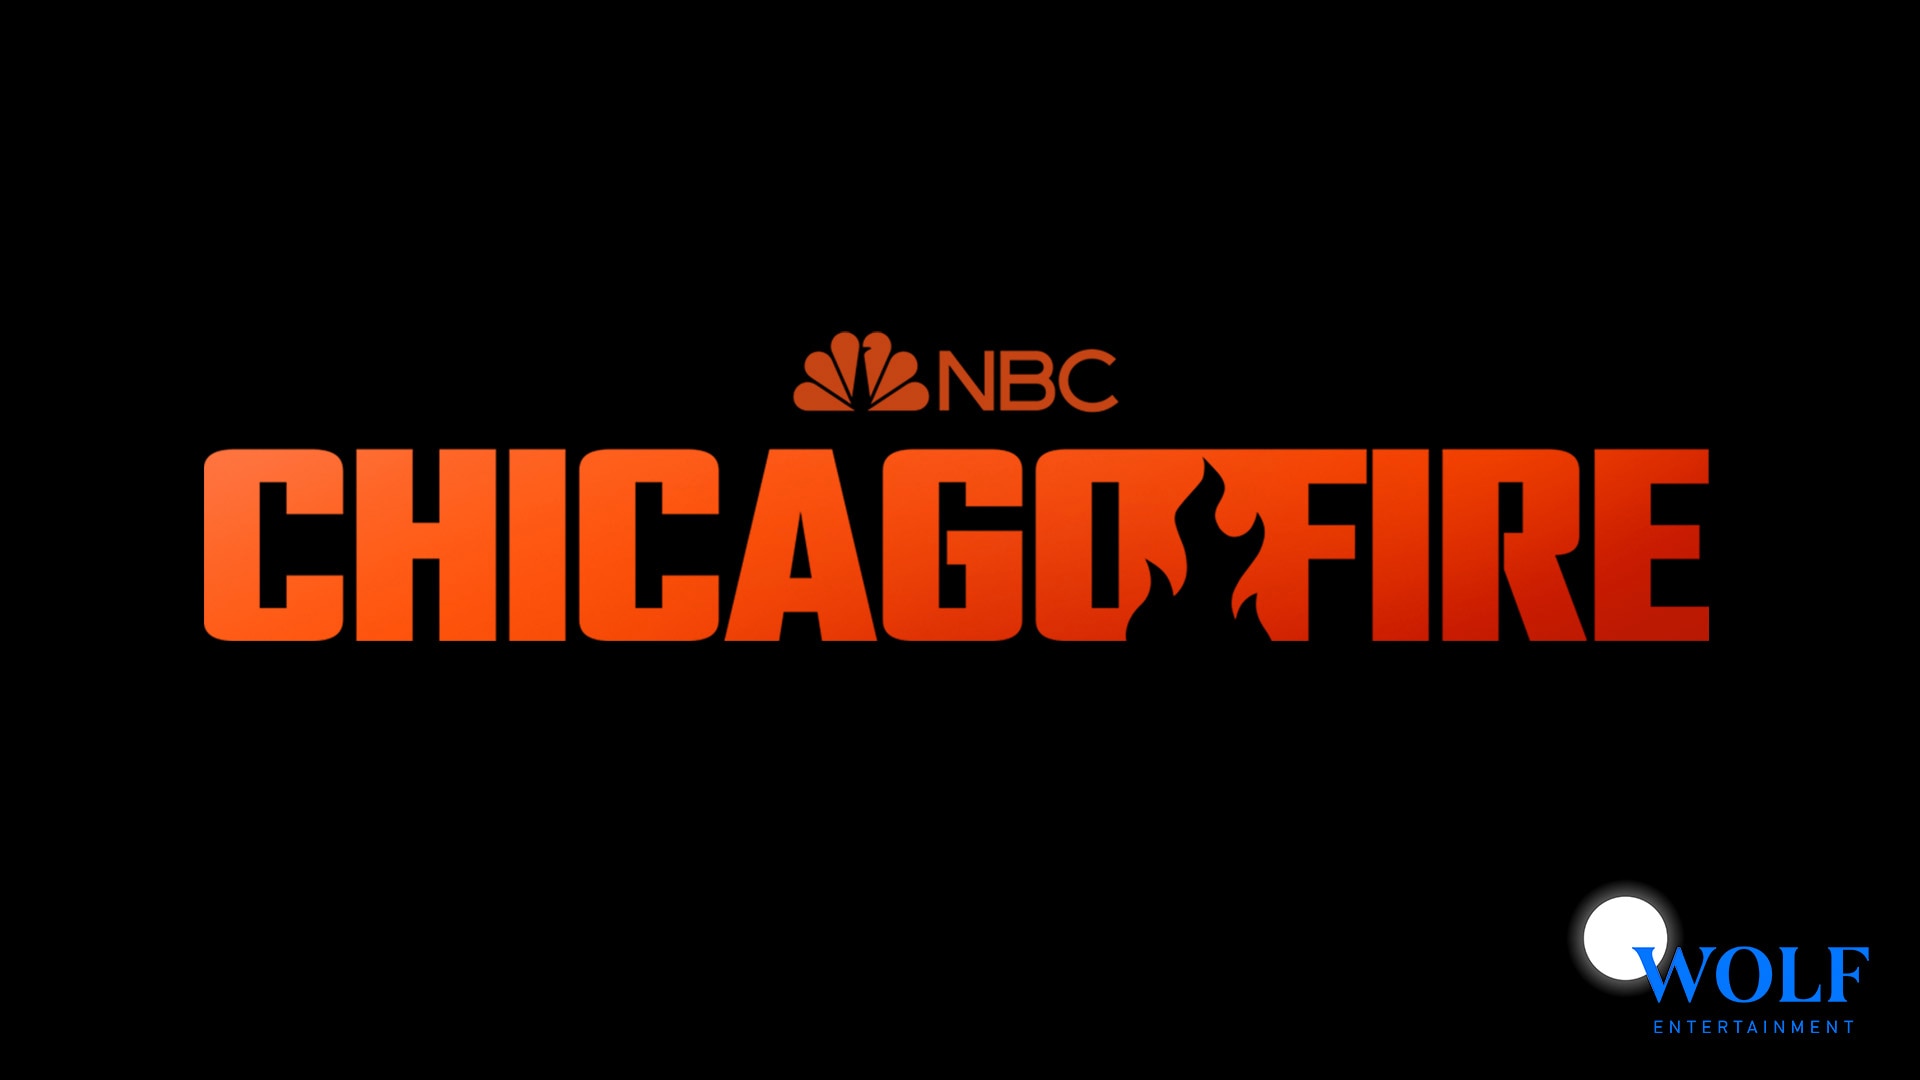 The Chicago Fire have a new logo, and this time, they got it right